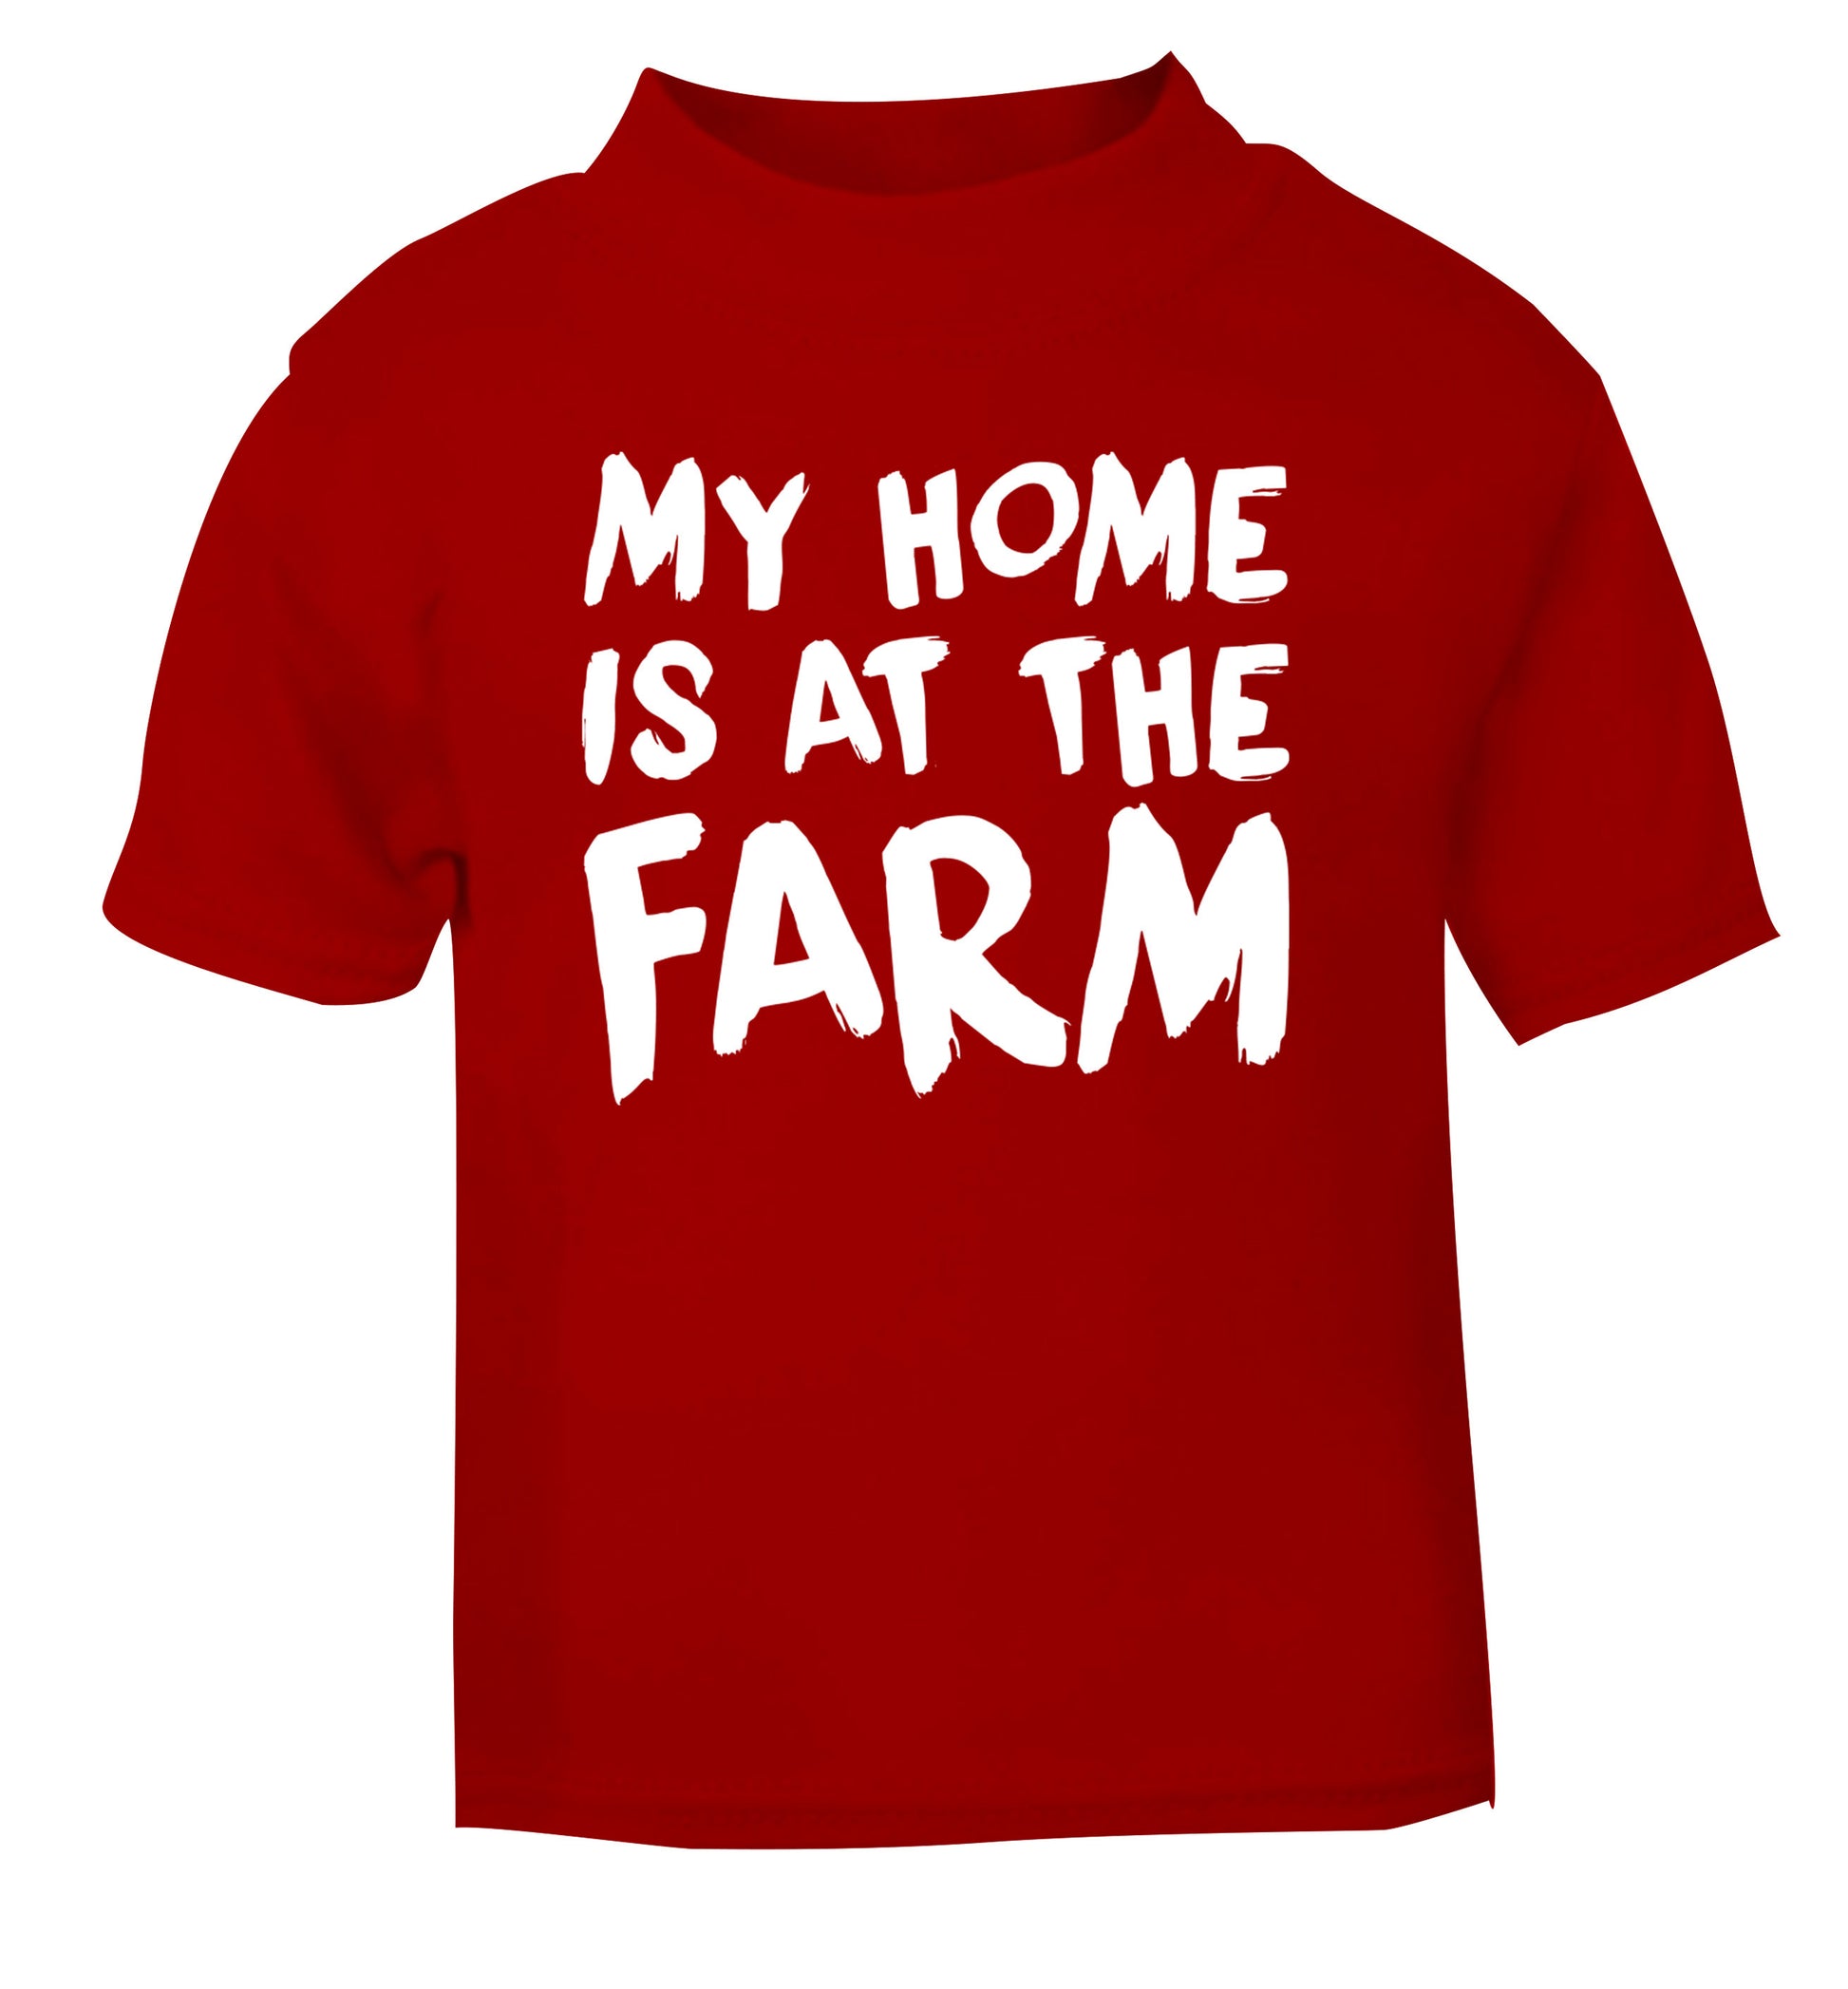 My home is at the farm red Baby Toddler Tshirt 2 Years